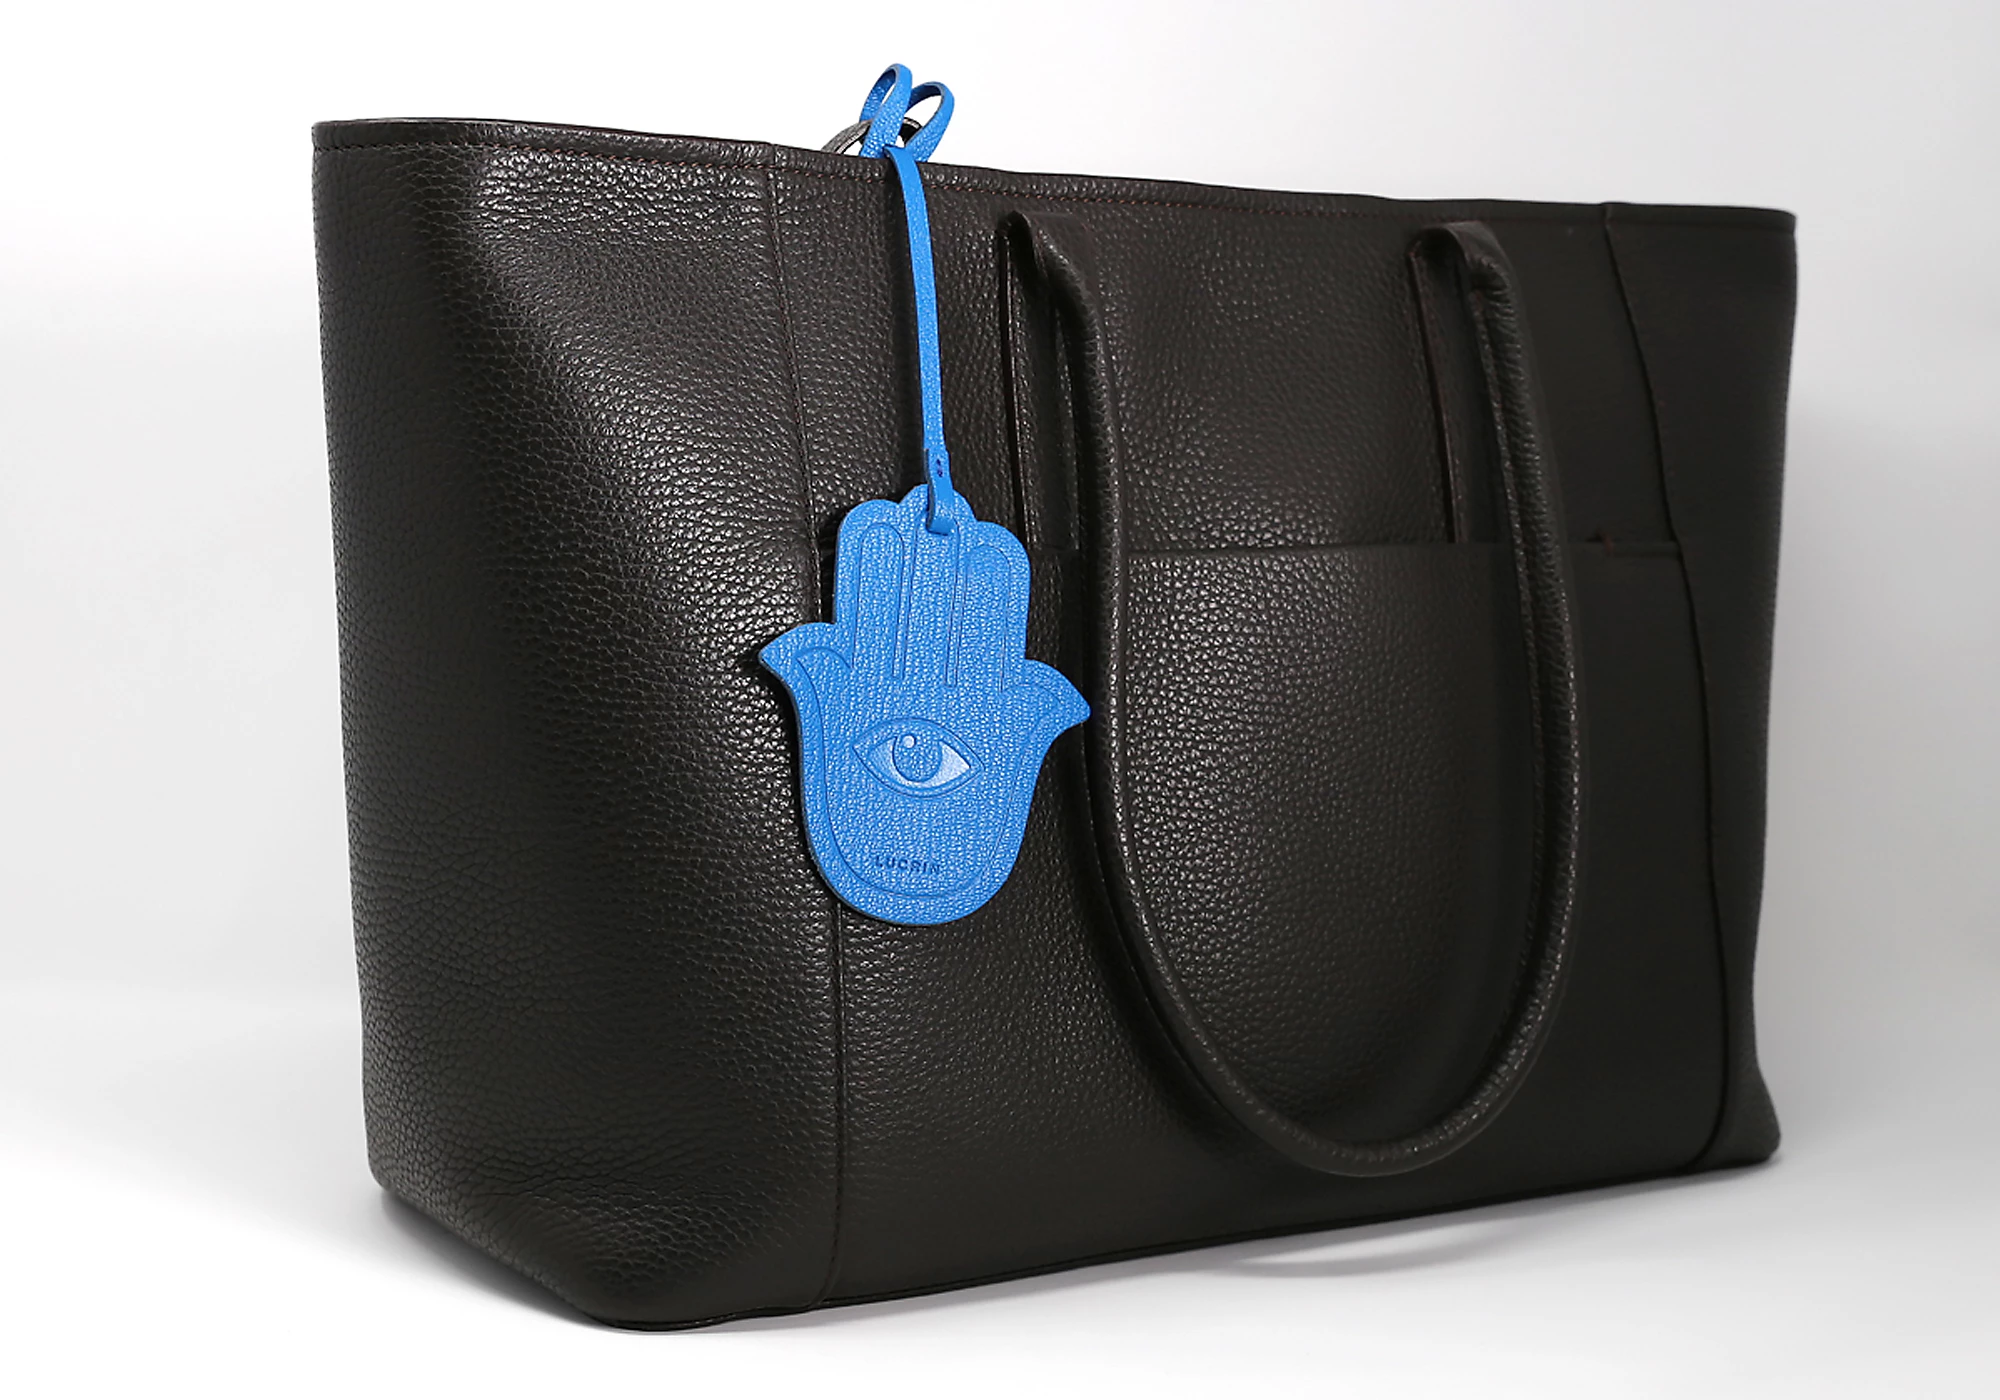 The Hamsa Lucky Charm - Denim Blue - Vegetable Tanned Leather